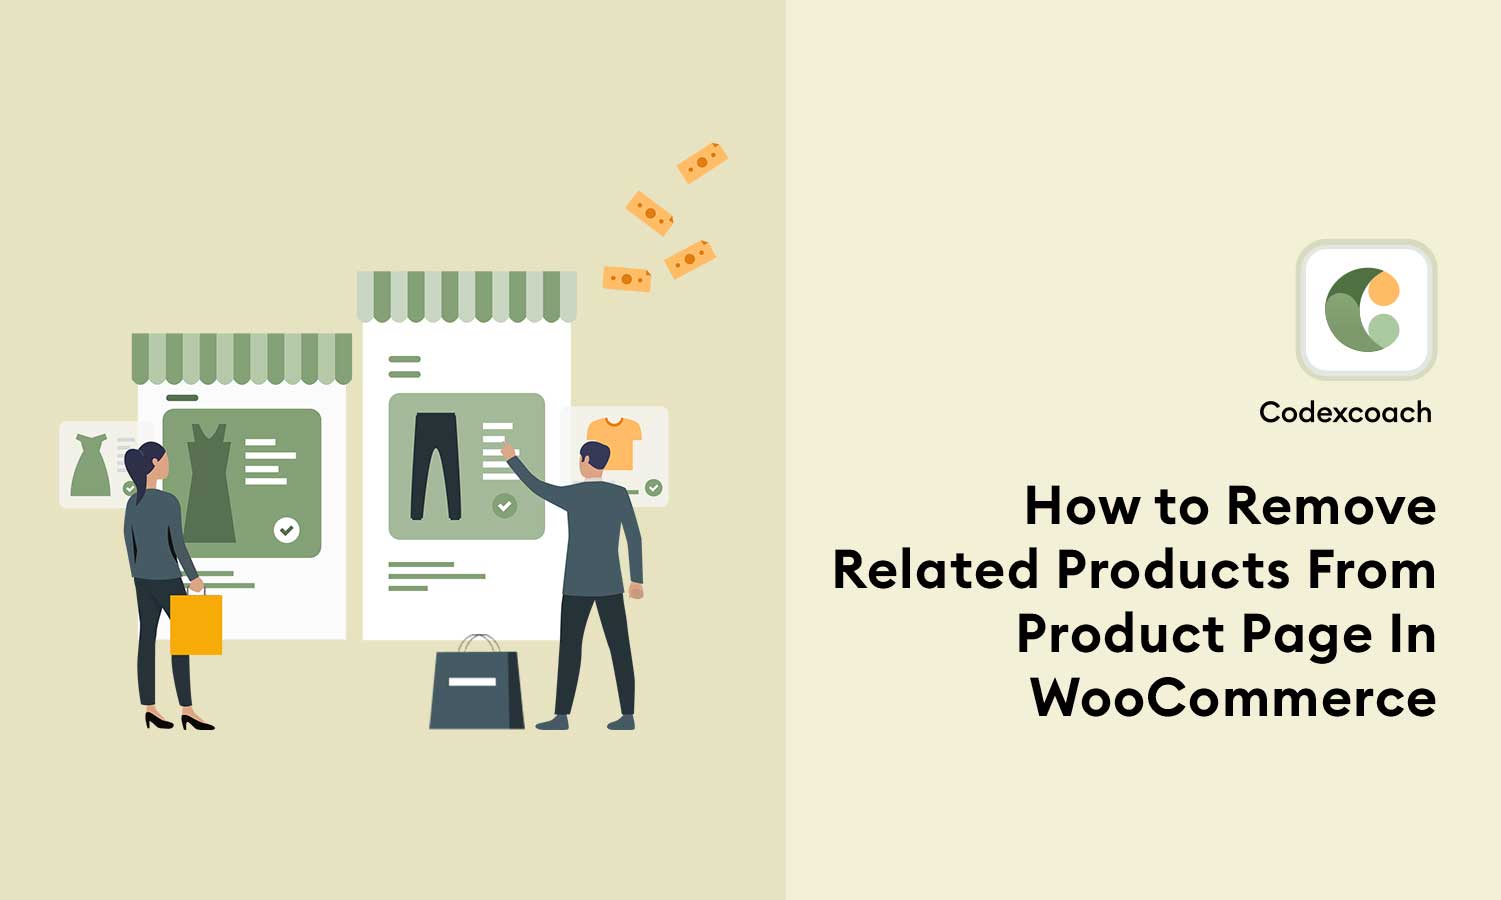 How to Remove Related Products From Product Page In WooCommerce